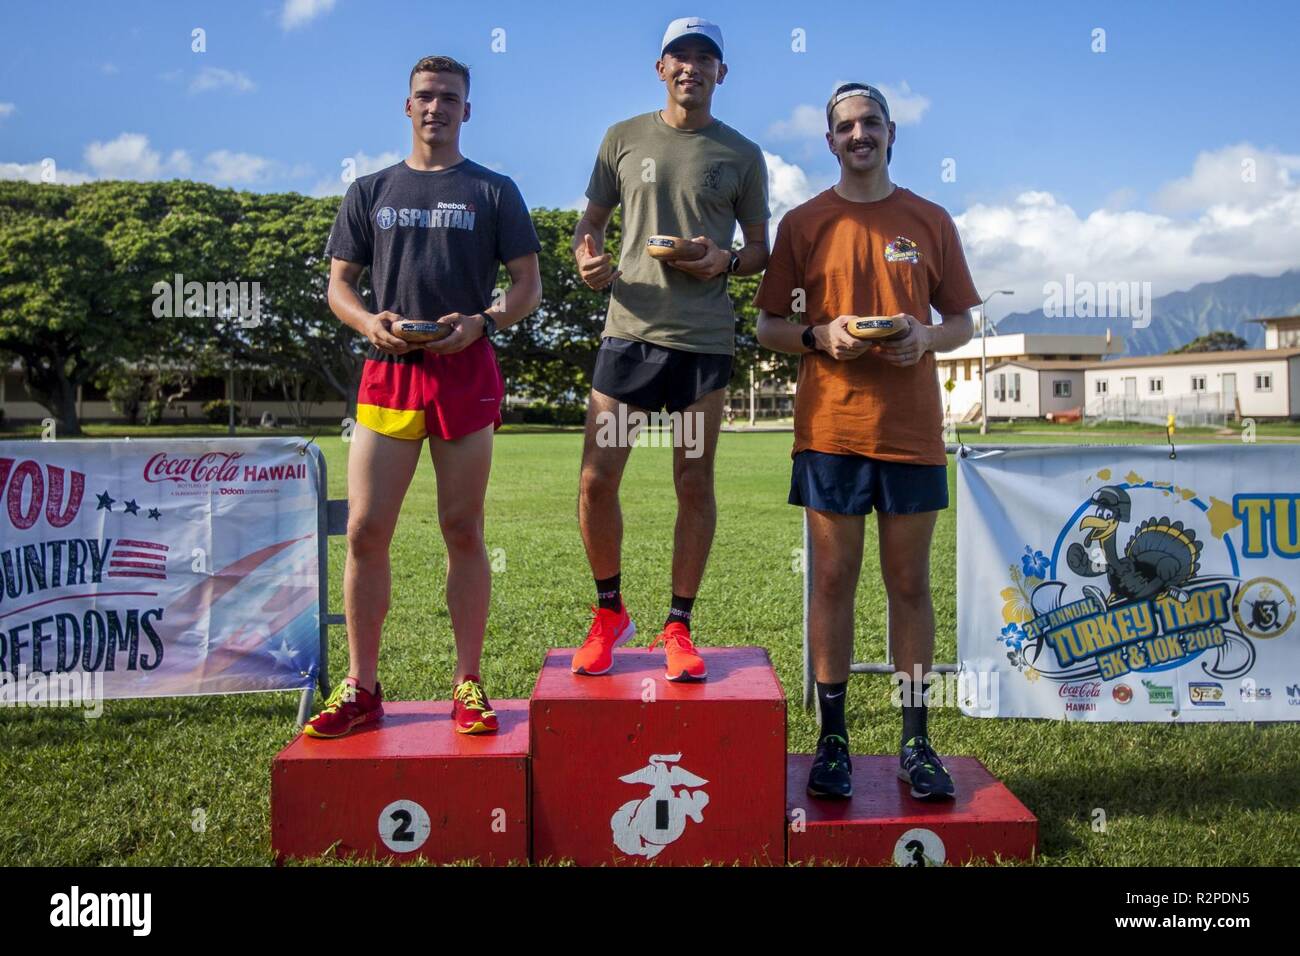 The top three overall winners of the Turkey Trot 10k pose for a group photo during the Turkey Trot 5k and 10k run, Marine Corps Base Hawaii, Nov. 3, 2018. The event, hosted by 3rd Radio Battalion and Marine Corps Community Services Hawaii, is an annual Thanksgiving-themed event that is open to U.S. Service members, their families, and civilian participants. The event promotes readiness and resiliency across the installation and local community by encouraging healthy, family-oriented activity. Stock Photo